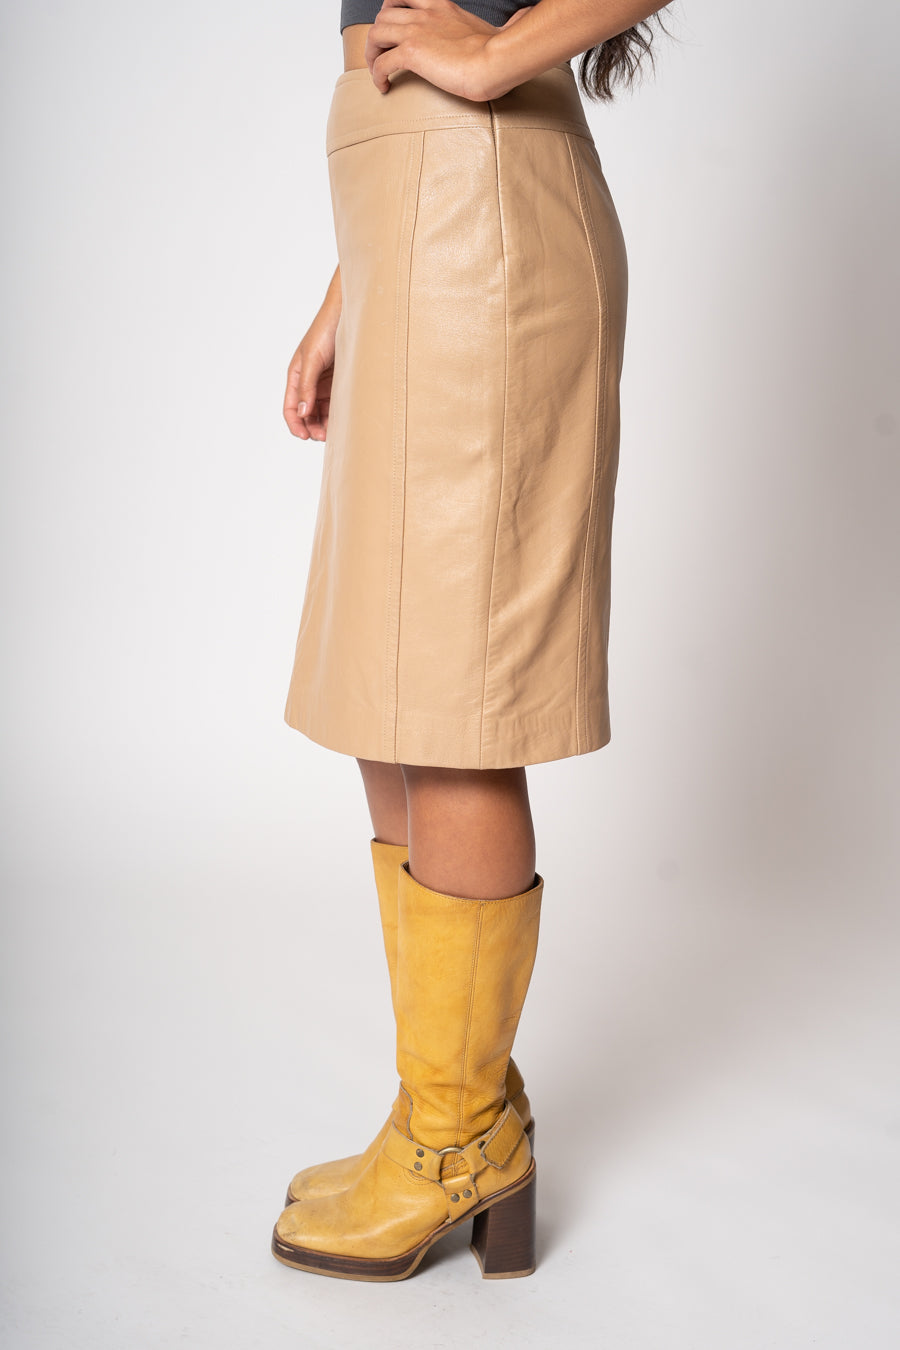 Beige Leather Pencil Skirt